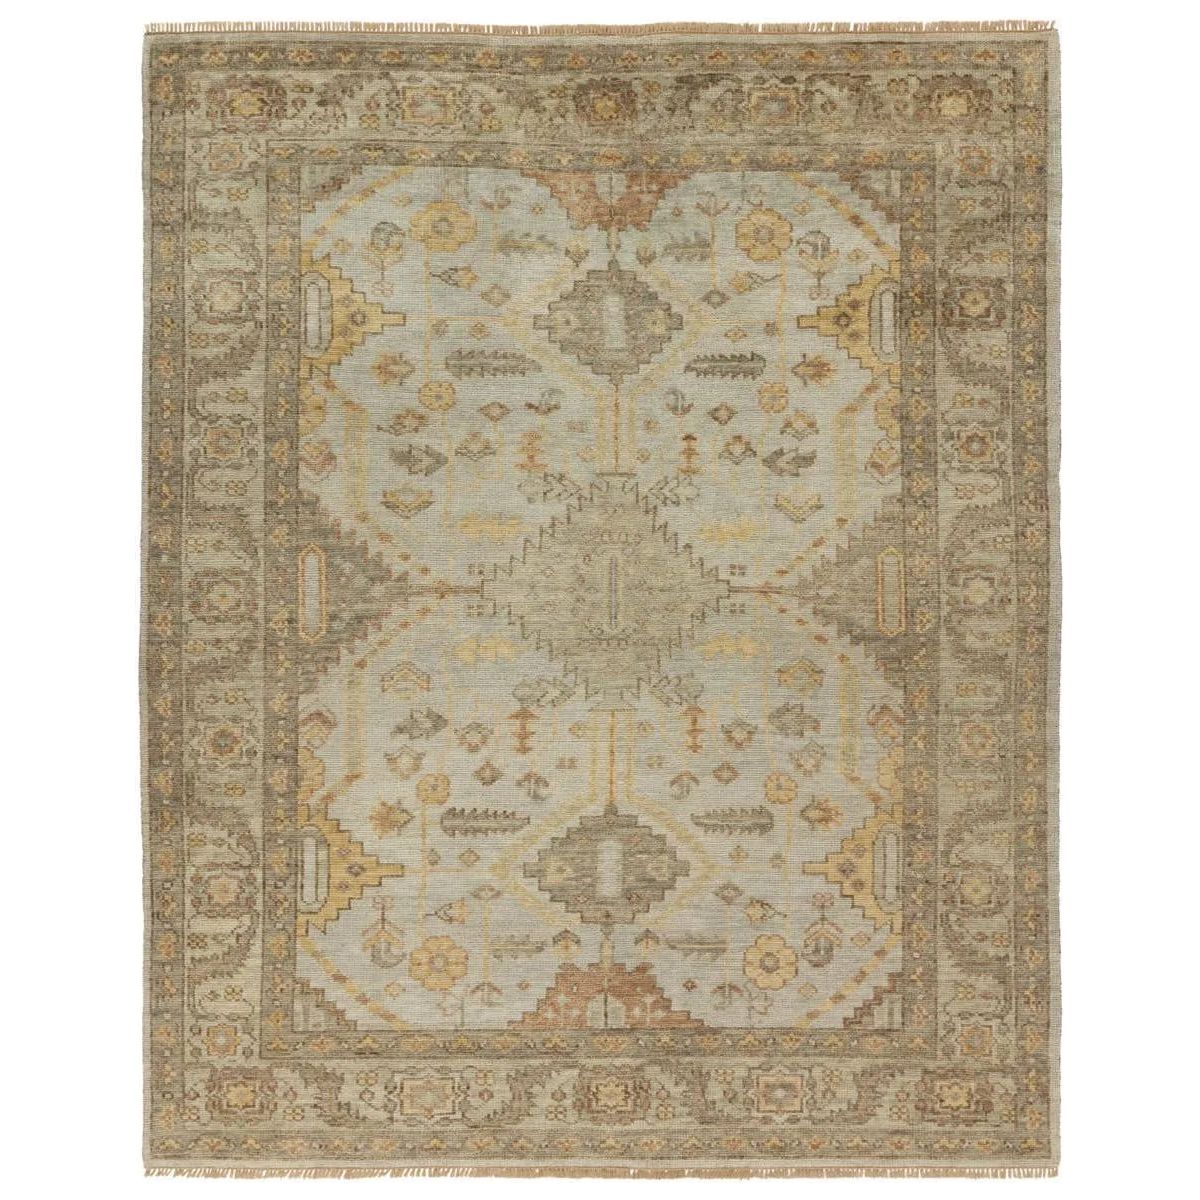 The Rhapsody Gehenna features heirloom-quality designs of stunningly abrashed Old World patterns. The Gehenna area rug boasts a beautifully distressed medallion motif with a decorative border and floral detailing. The gray and brown tones are accented with light blue, sage, beige, and yellow hues for added depth and intrigue. Amethyst Home provides interior design, new home construction design consulting, vintage area rugs, and lighting in the Houston metro area.